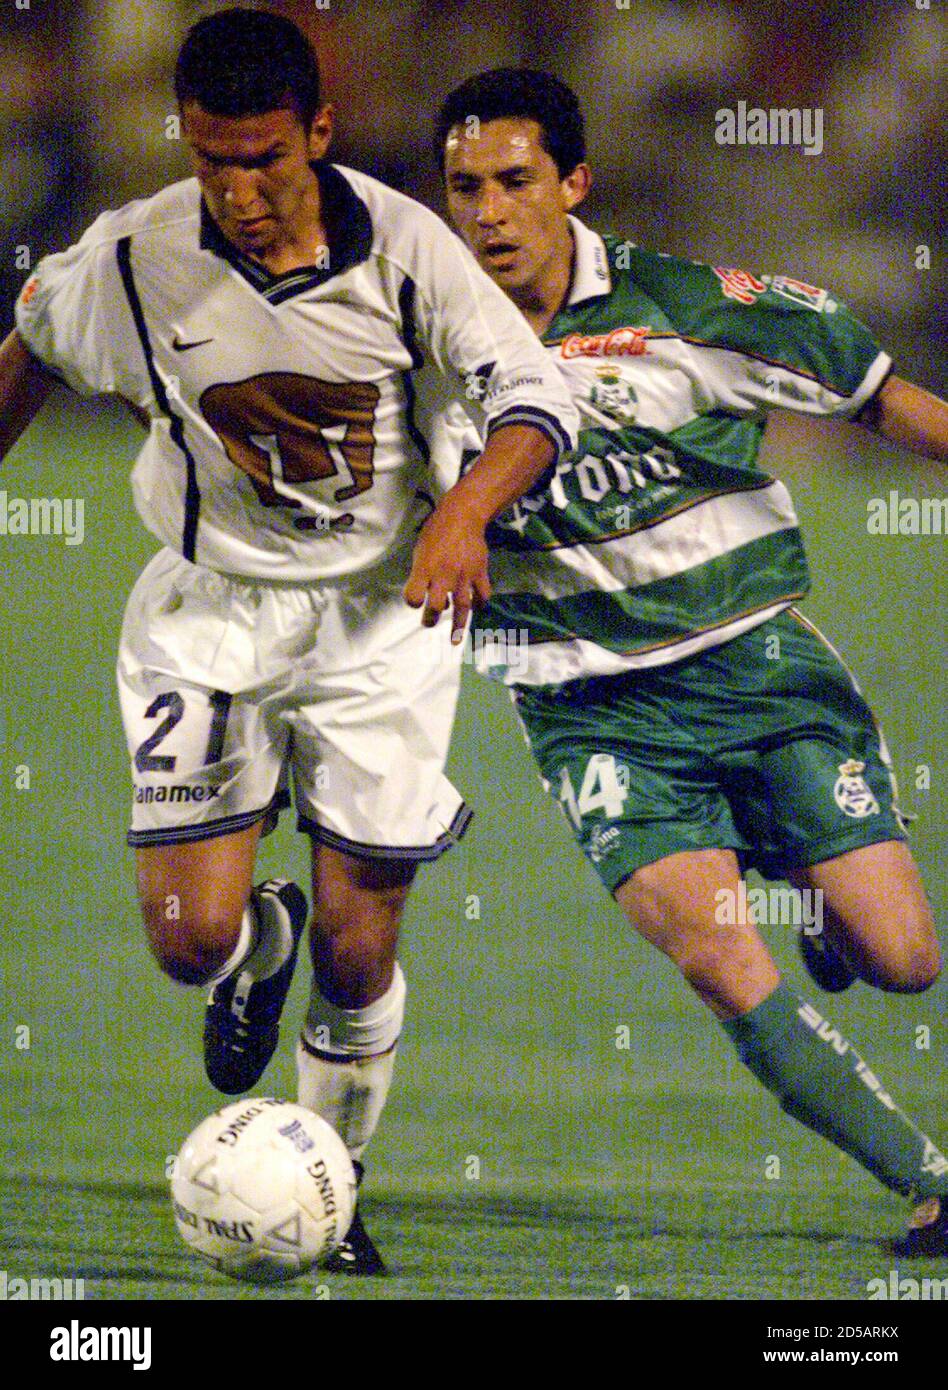 Mexican player Sergio Bernal (L) of club Pumas fights for the ball with  Miguel Garcia of club Santos Laguna during the first half of their  semifinal summer 2000 championship match in the